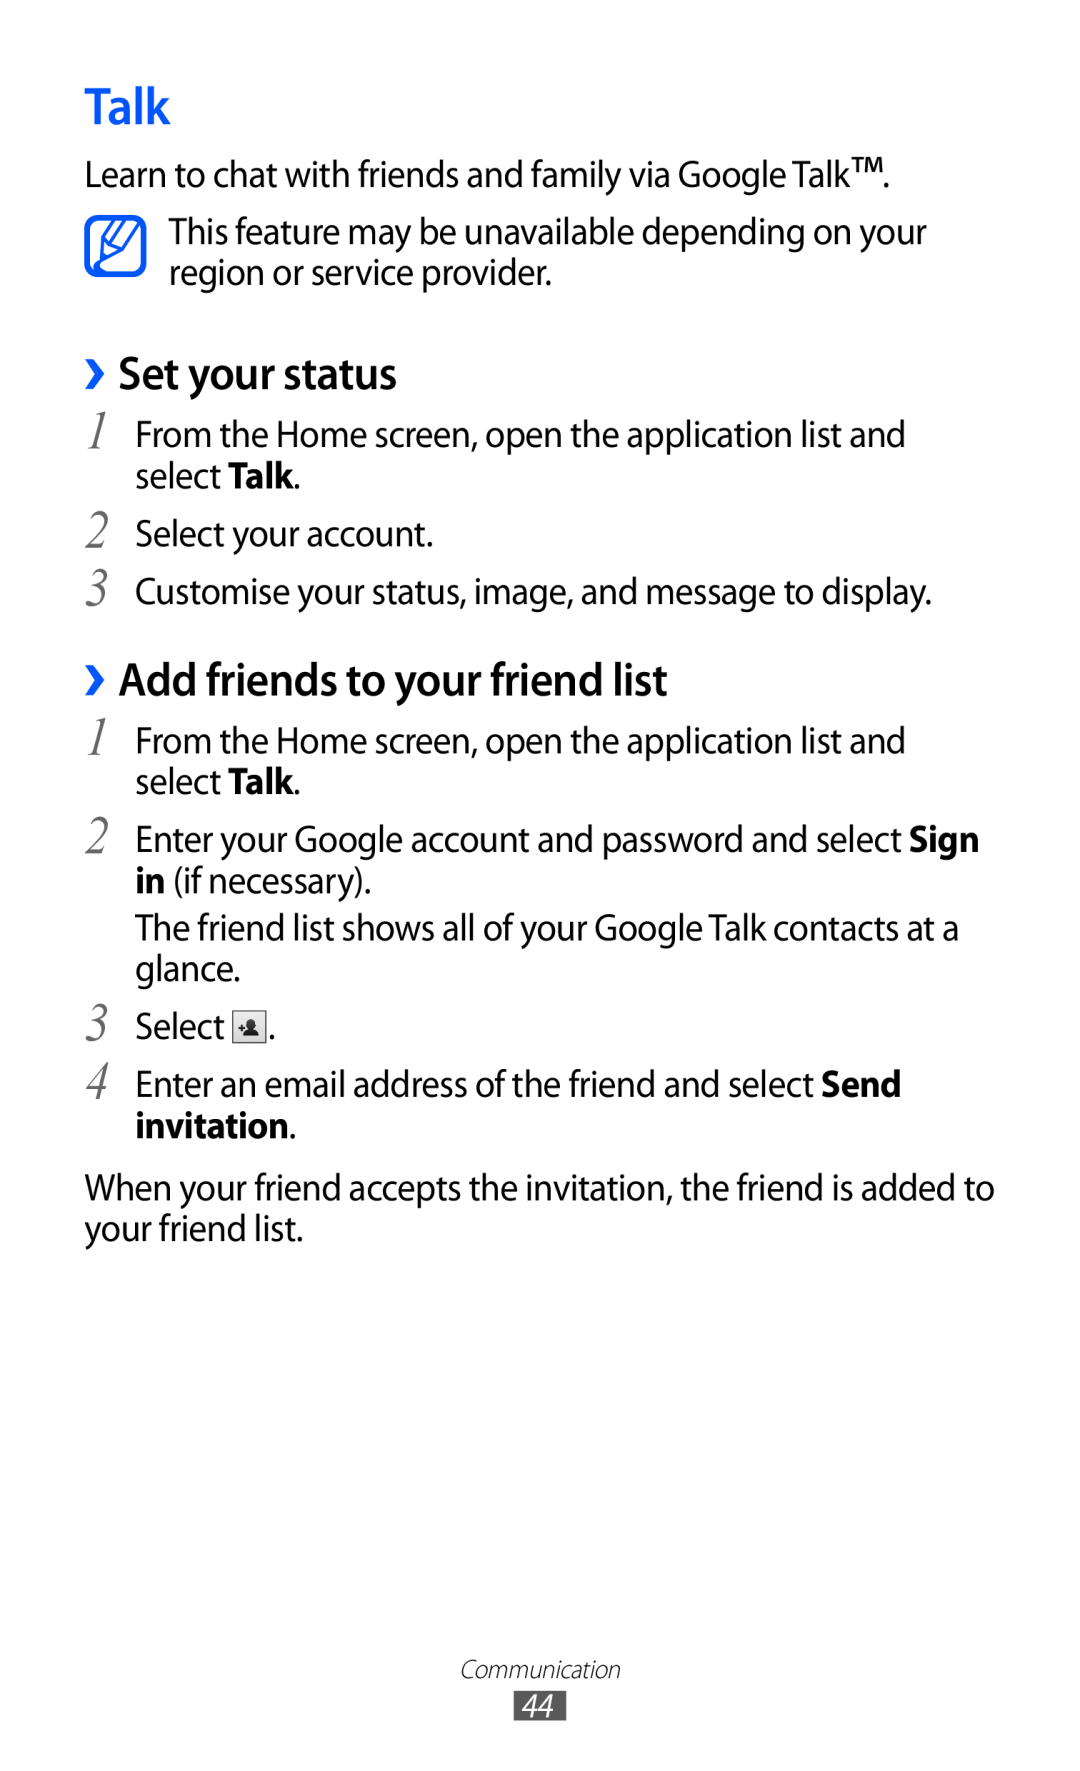 Samsung GT-P7510 user manual Talk, ››Set your status, ››Add friends to your friend list 